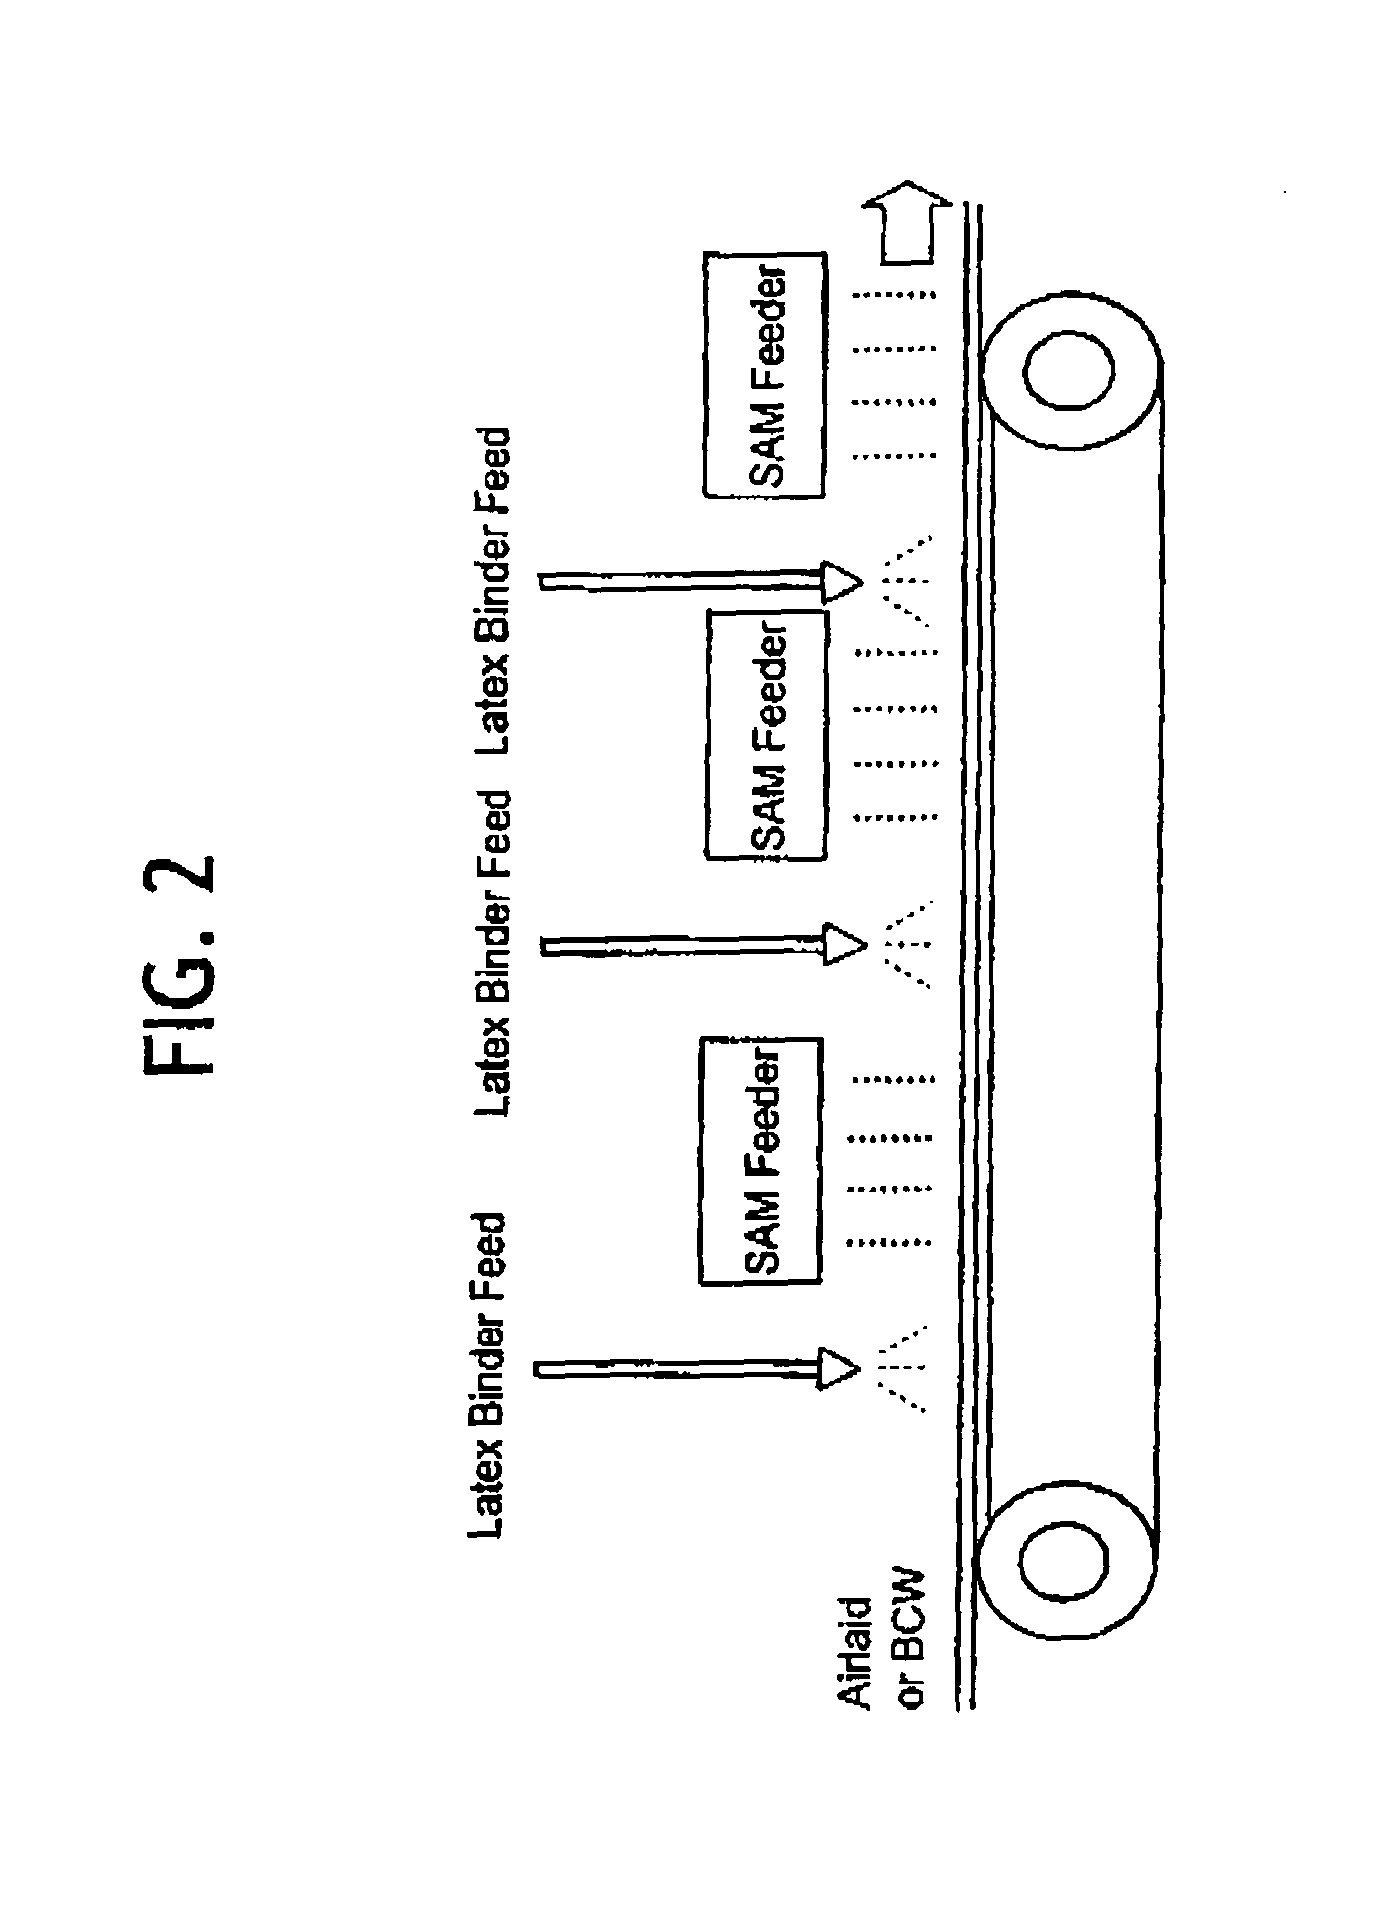 Unitary absorbent core with binding agents